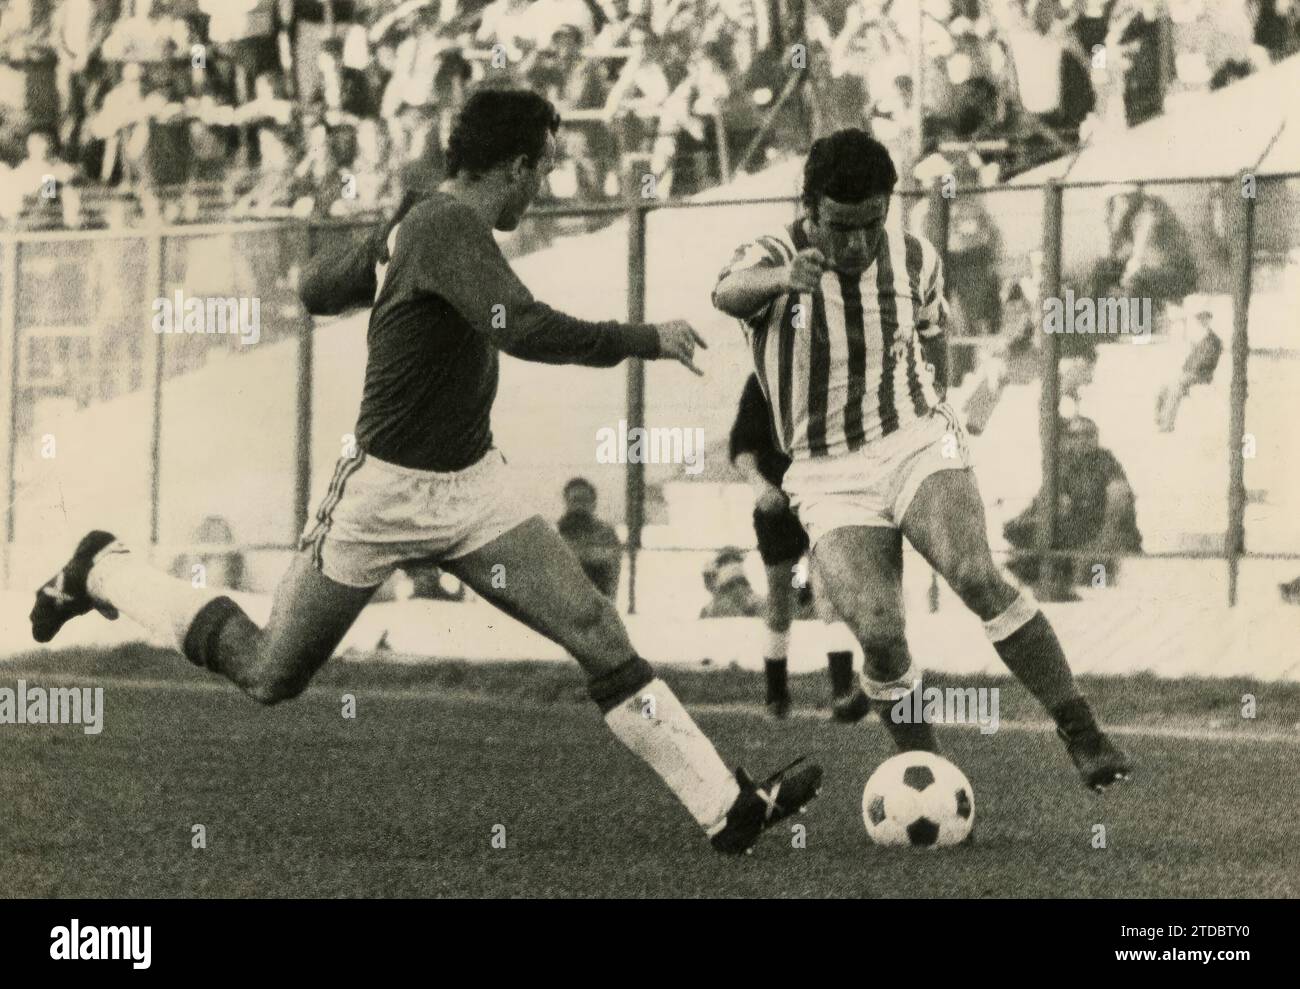 Antonio Benitez Fernandez. Left-handed winger with a refined technique and proven class. He was born in Jerez de la Frontera on June 2, 1951. He arrived at Betis in 1969, in the second division. He debuted in the first division on October 3, 1971 in the Valencia-Betis match, with Levantina winning 2-0. He remained at Betis until the end of the 1982-83 season, after which he retired. In the first division he played ten seasons, with a total of 203 games and 14 goals scored. Benítez He was a starter for Betis, which became champion of the I Copa del Rey Juan Carlos I, on June 25, 1977. In the Im Stock Photo